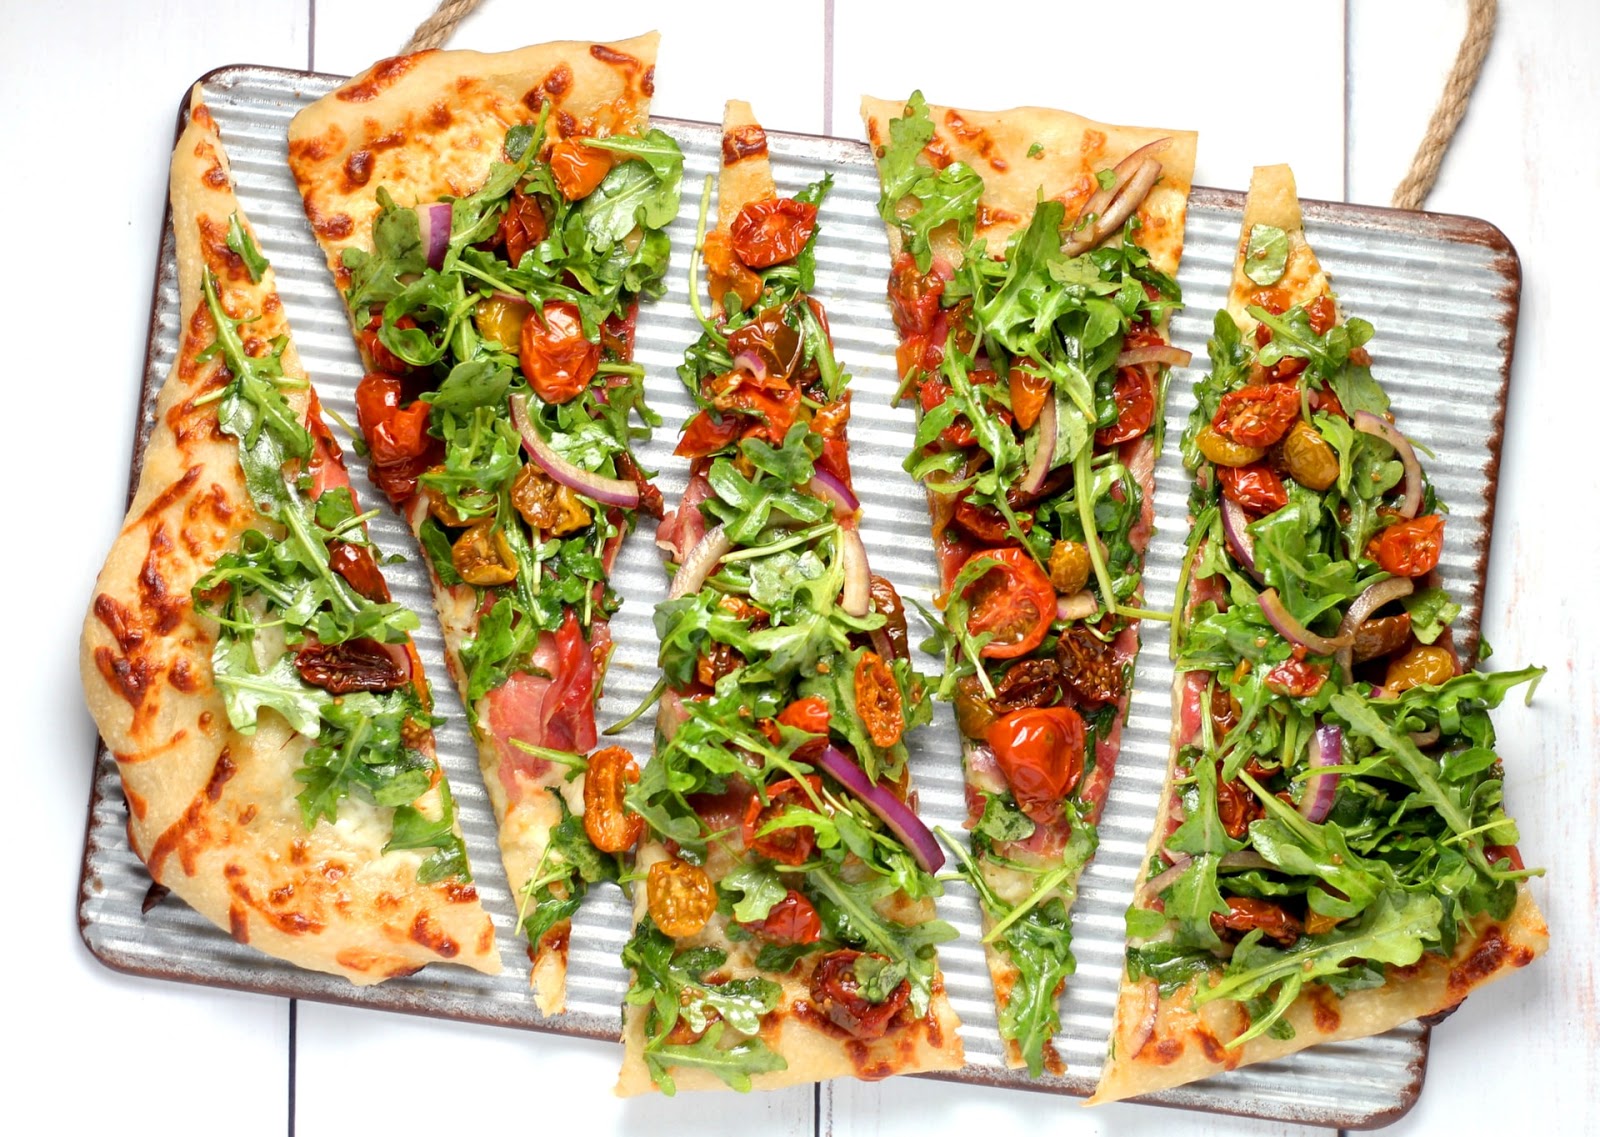 Flatbread pizza with arugula, tomatoes, and red onion